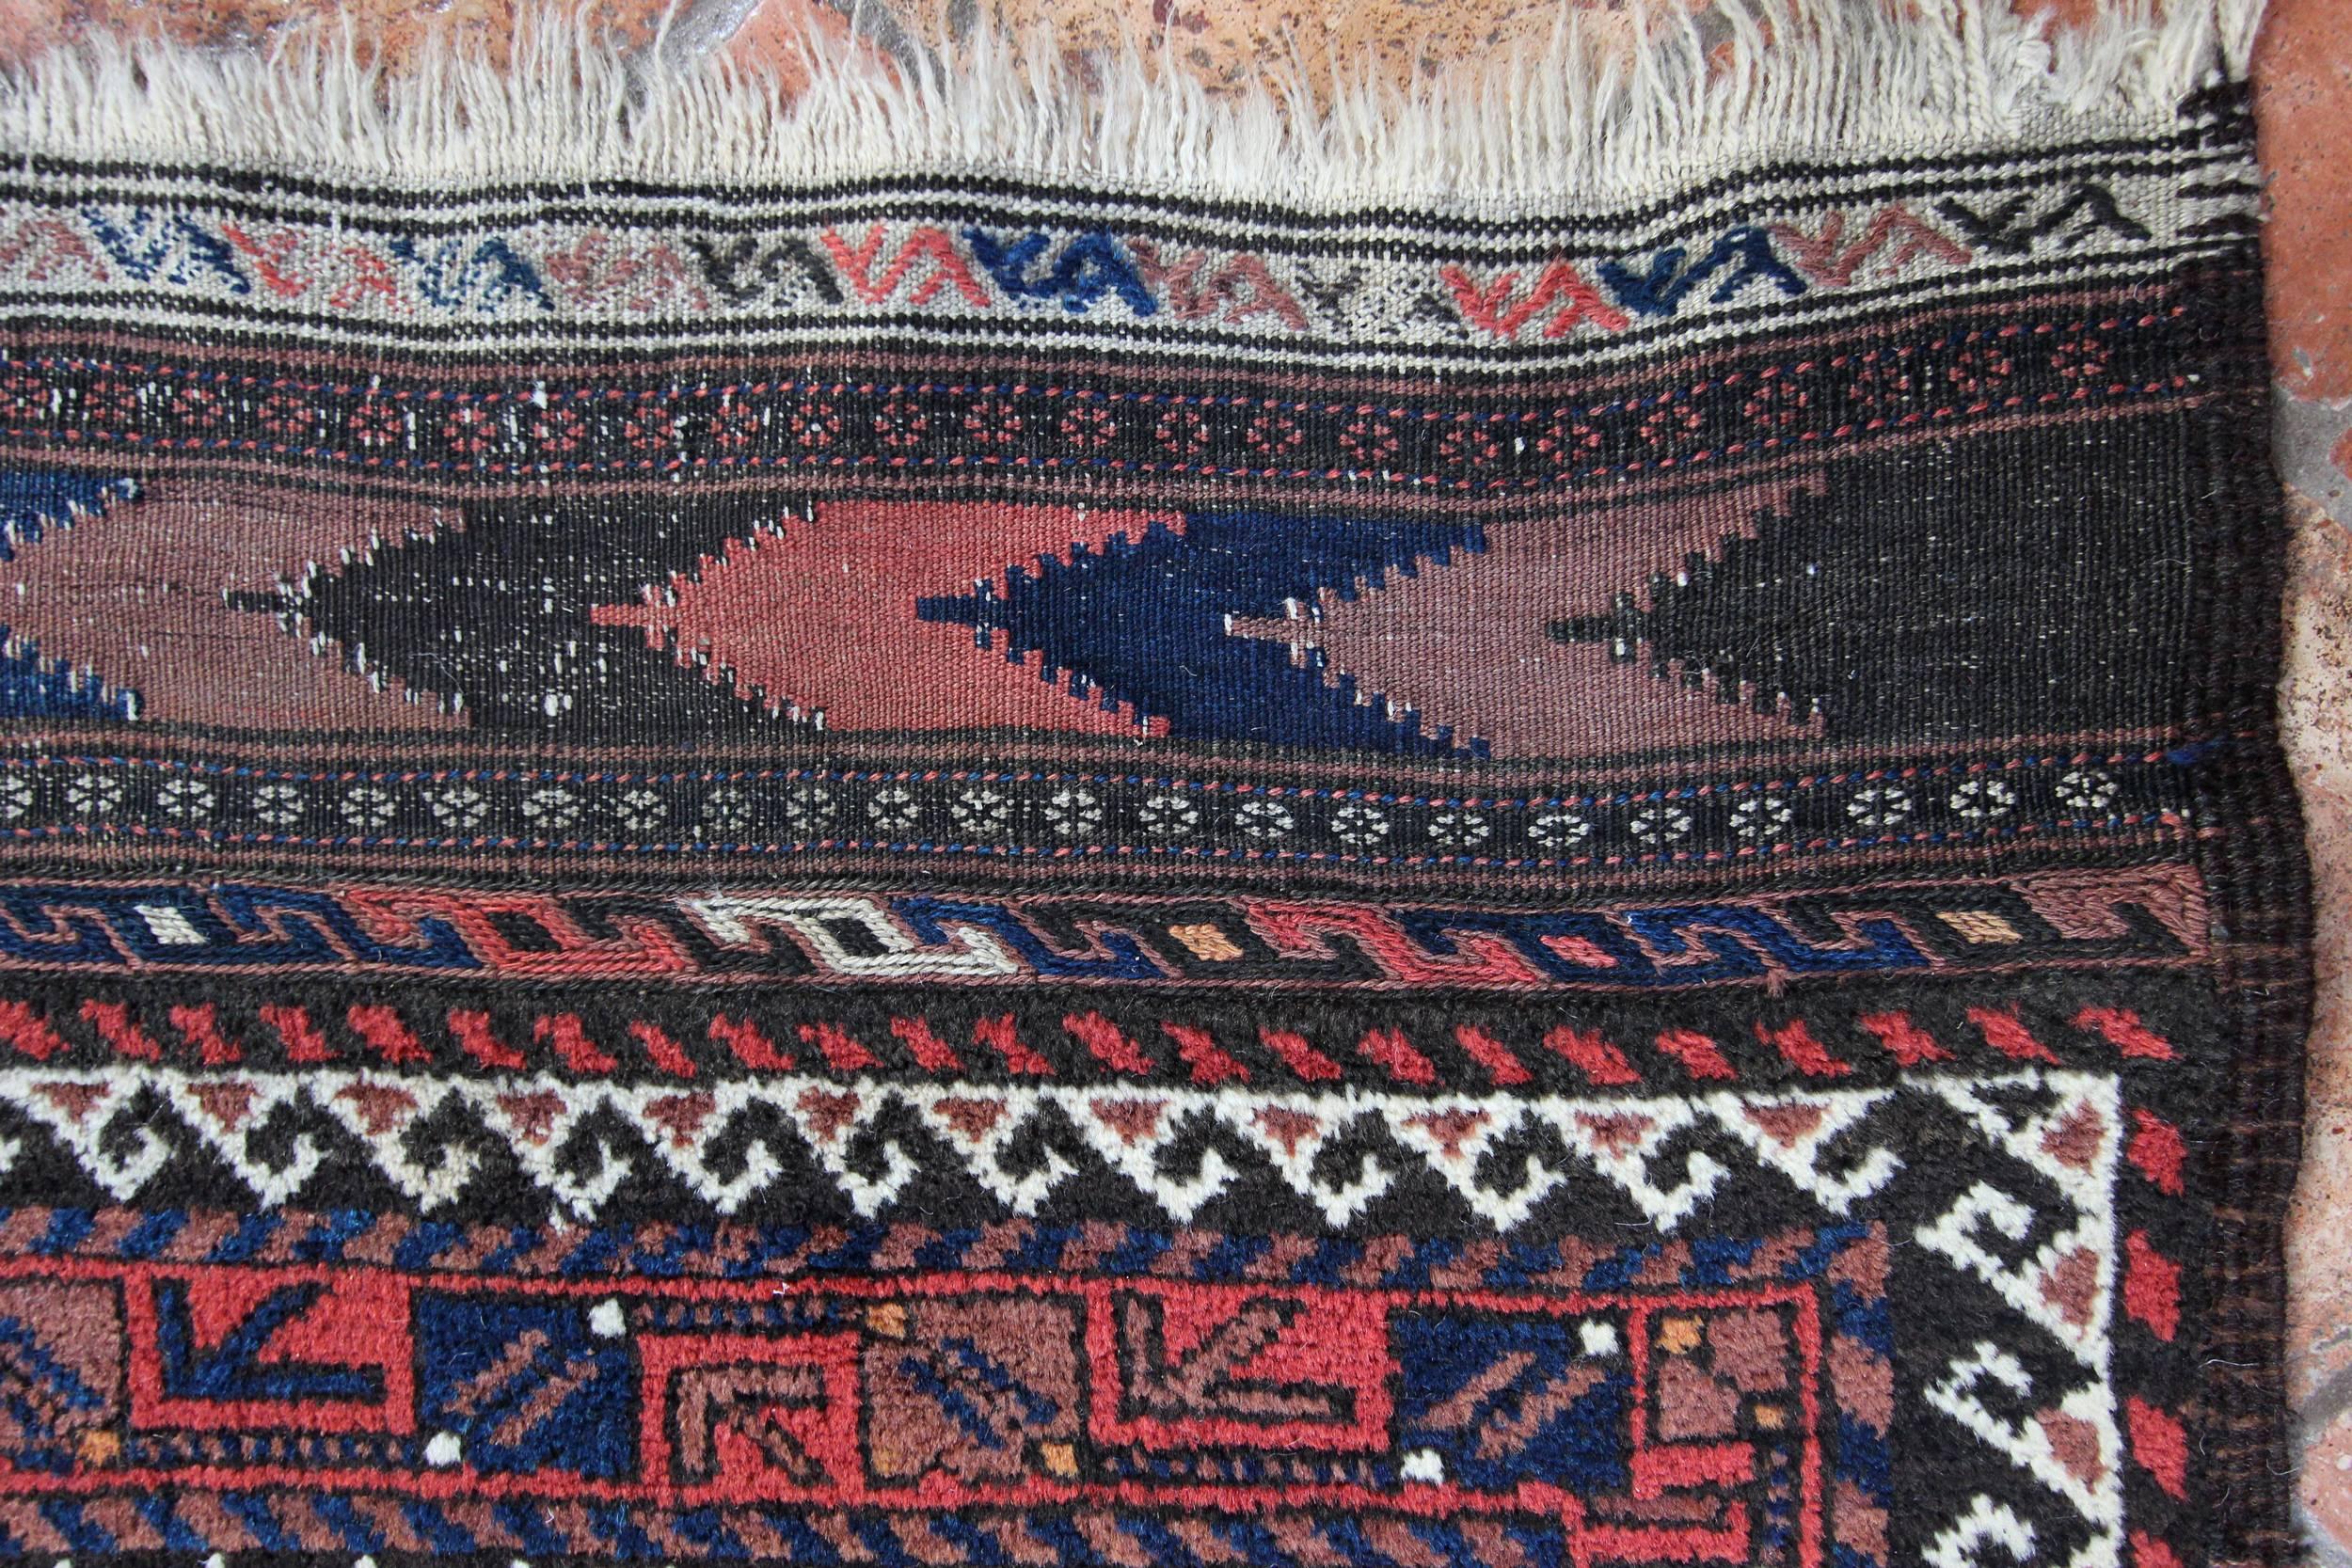 A wonderful example of tribal rug weaving, in excellent condition this antique Baluch rug has a fantastic array of natural colours.  This sets it apart from standard Baluch rugs, often they can be bright harsh oranges and blacks and limited in depth